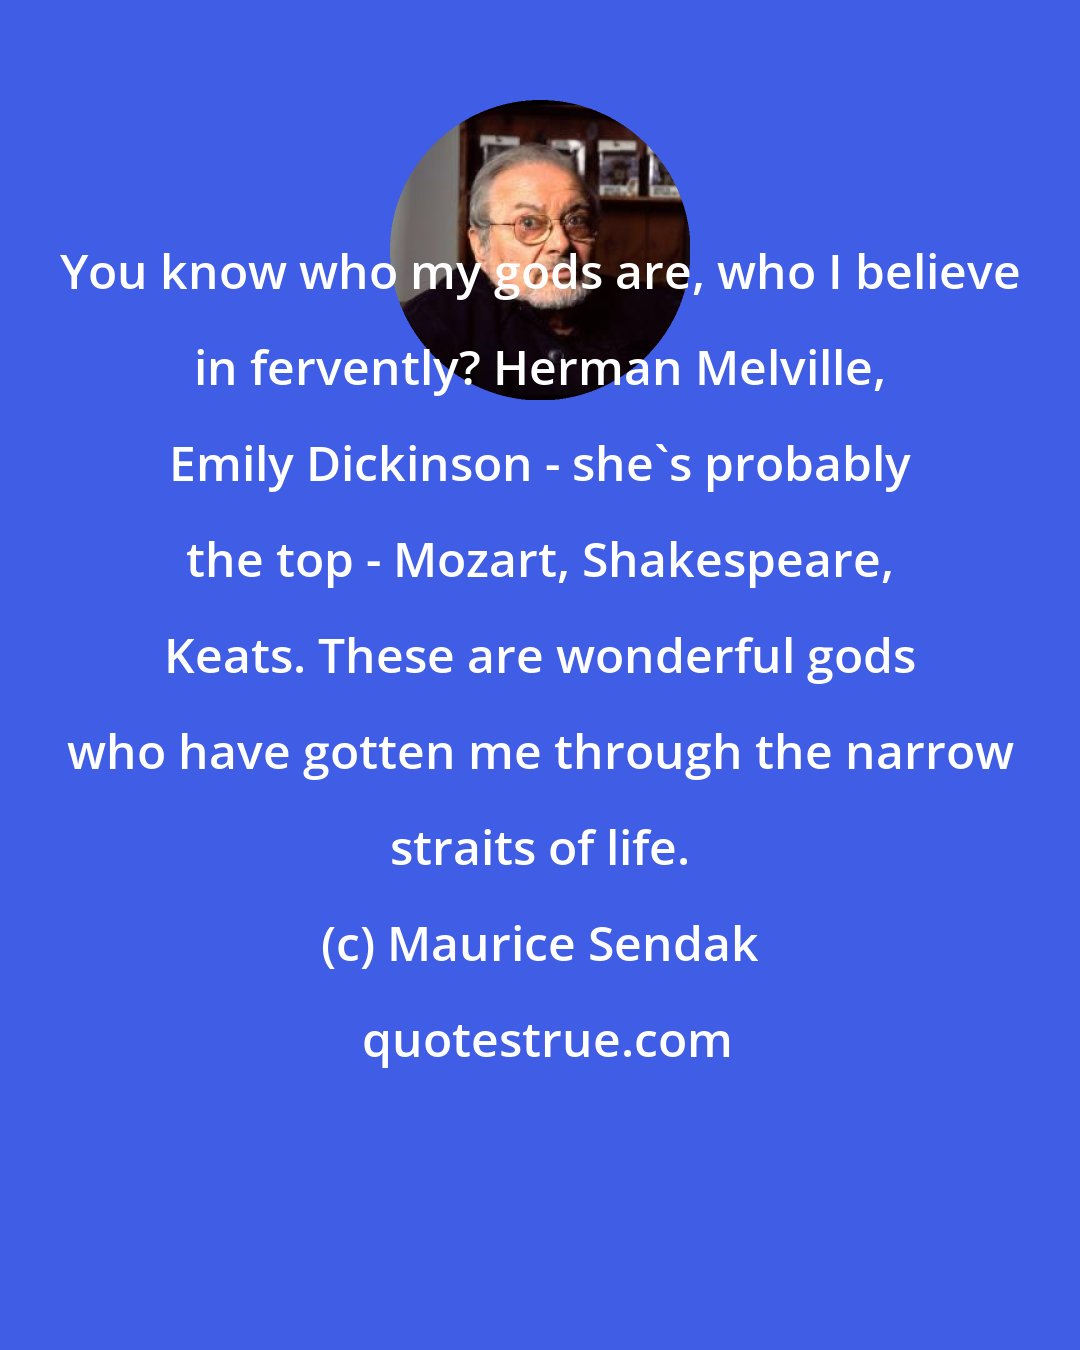 Maurice Sendak: You know who my gods are, who I believe in fervently? Herman Melville, Emily Dickinson - she's probably the top - Mozart, Shakespeare, Keats. These are wonderful gods who have gotten me through the narrow straits of life.